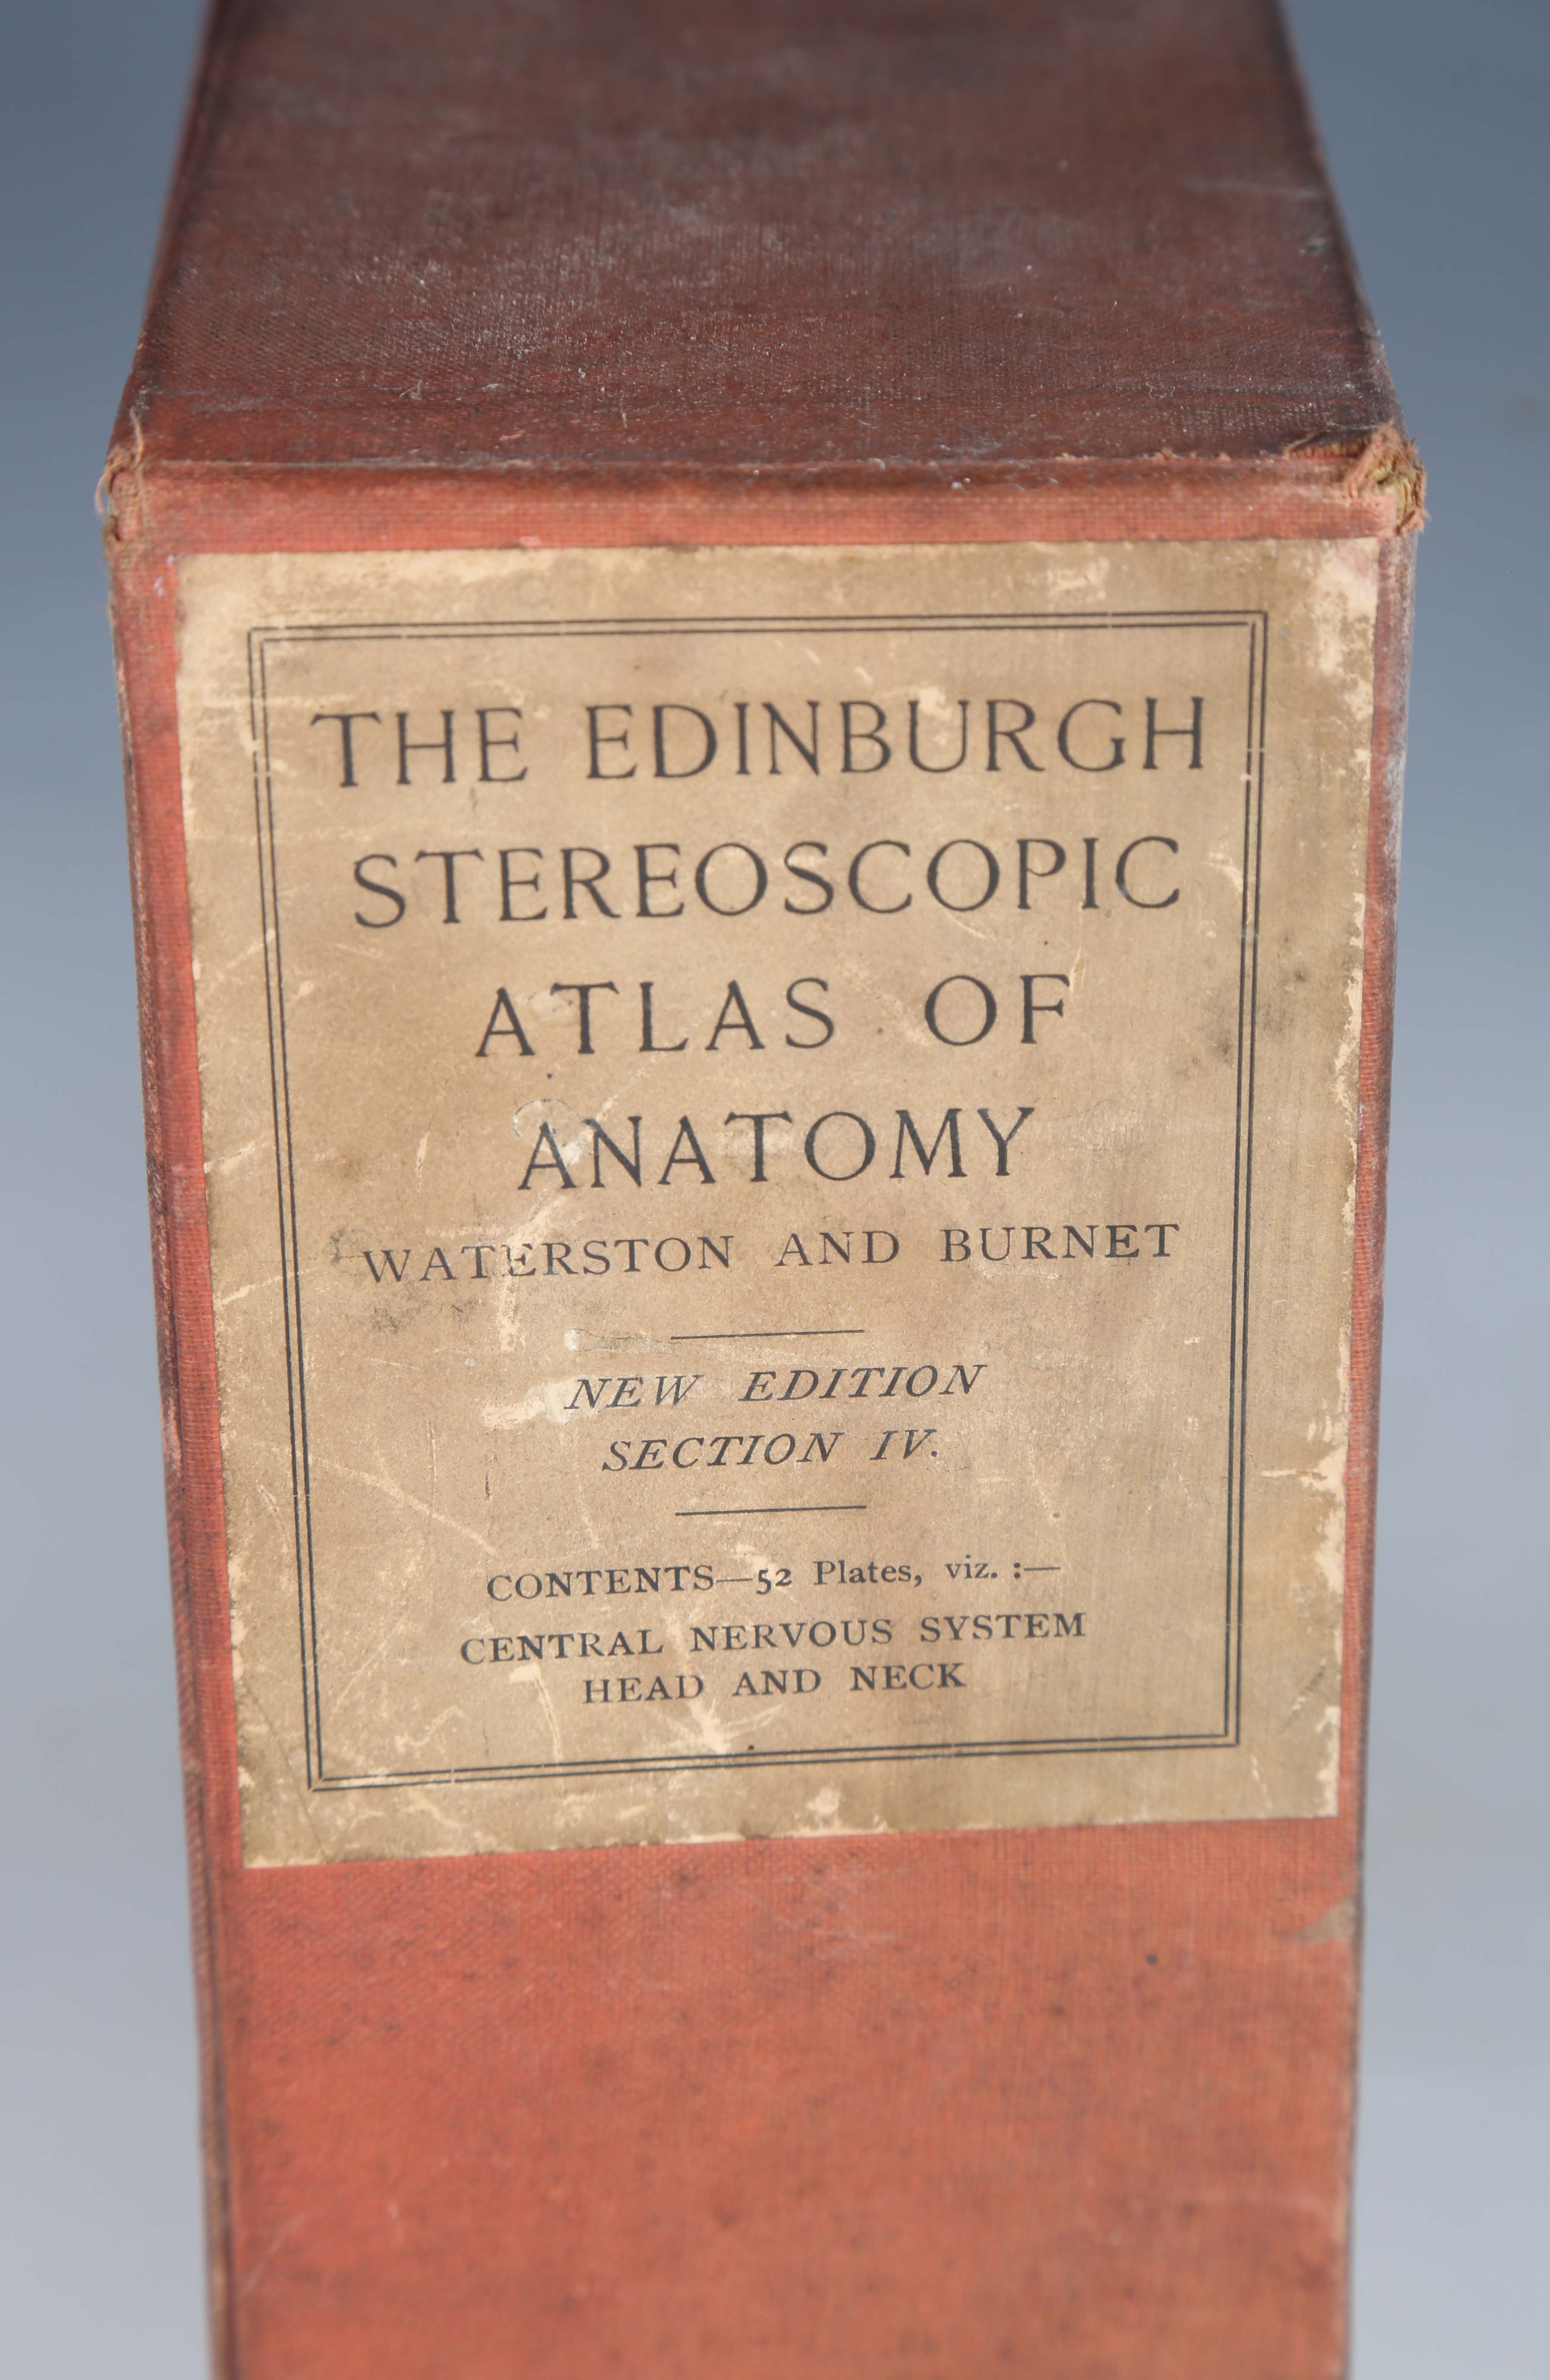 'The Edinburgh Stereoscopic Atlas of Anatomy', Waterston and Burnet, New Edition, Section IV, with a - Image 4 of 11